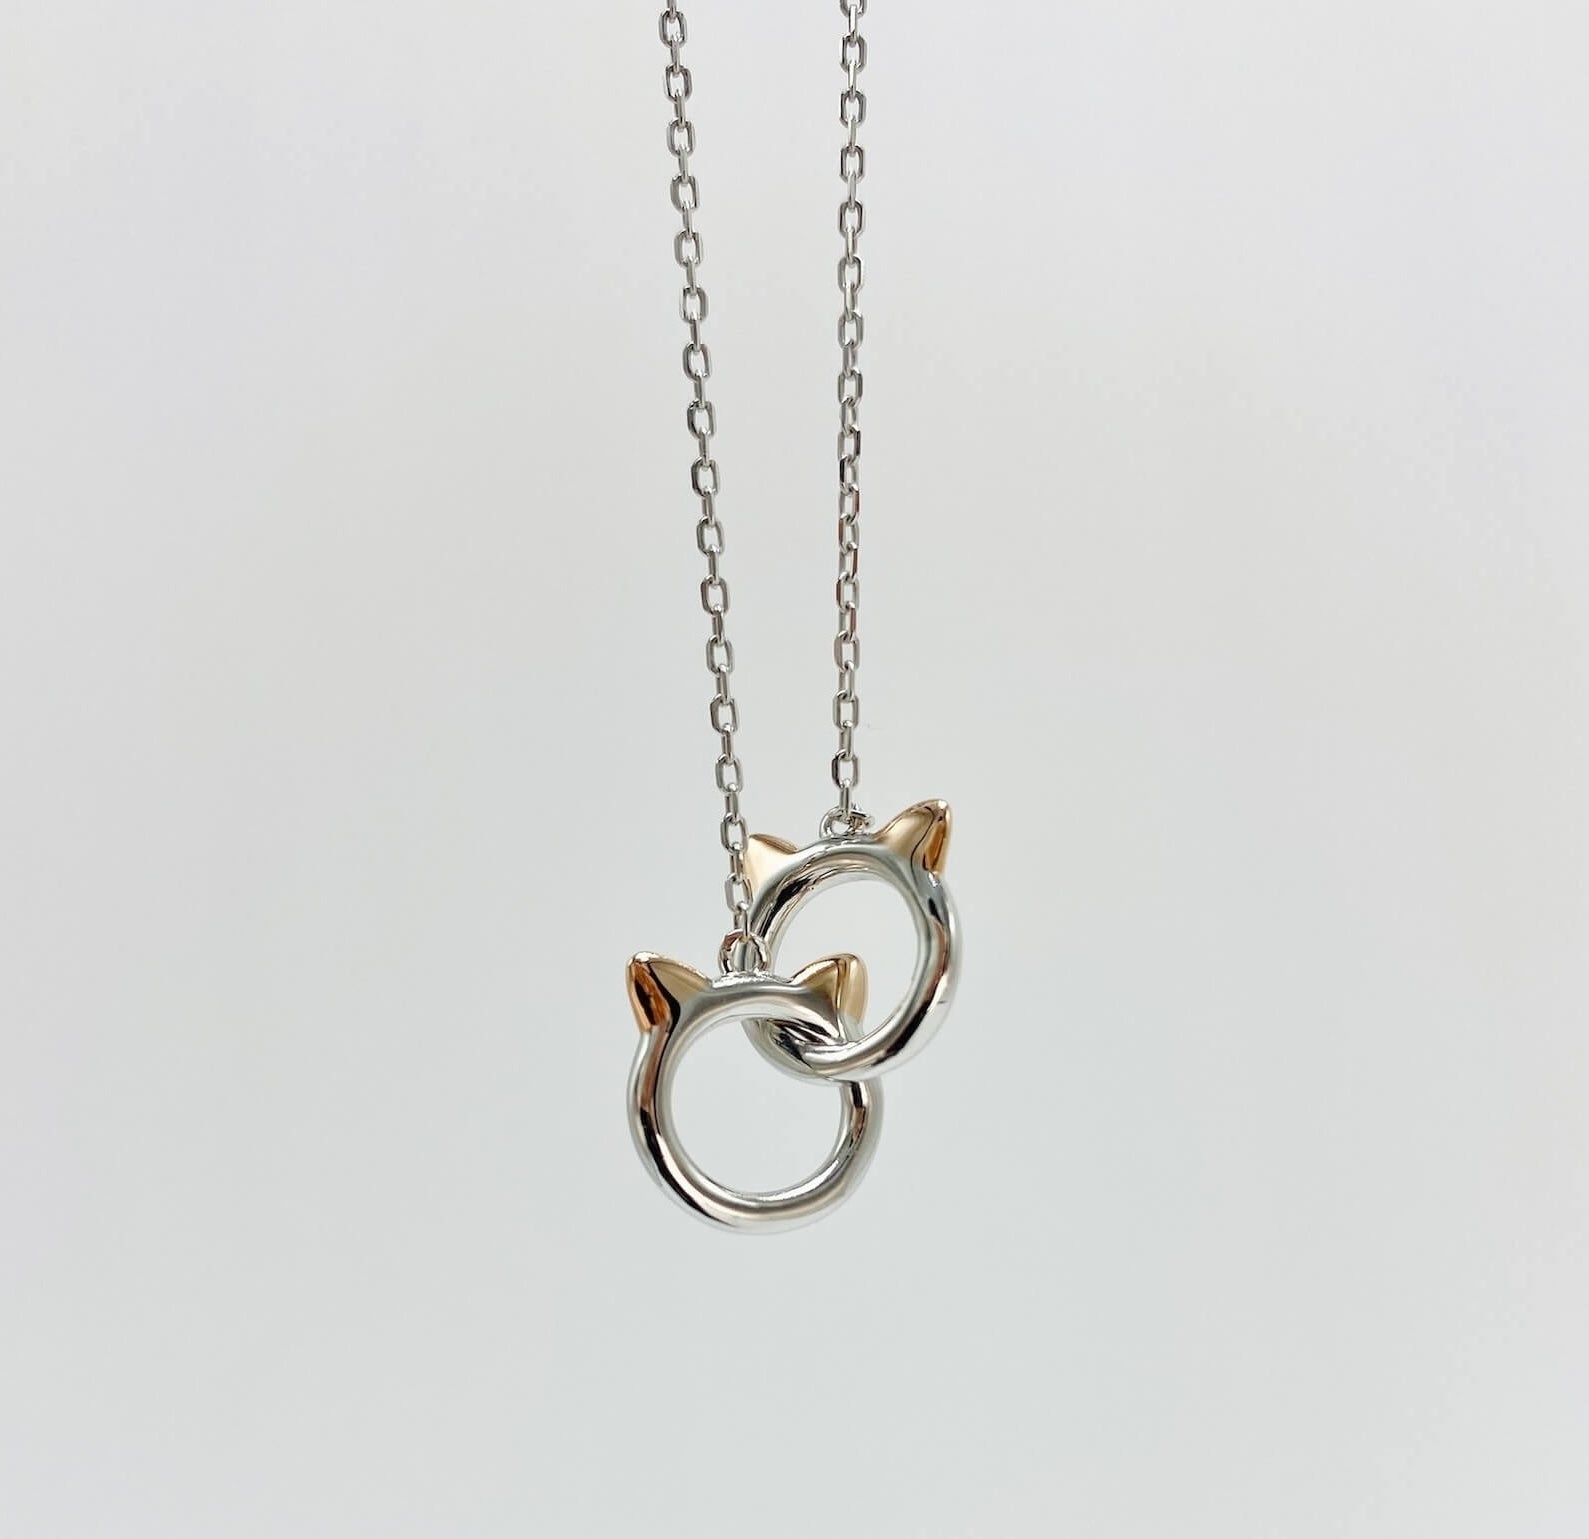 Sterling silver cat infinity necklace. Features two cat head charms that are linked. 